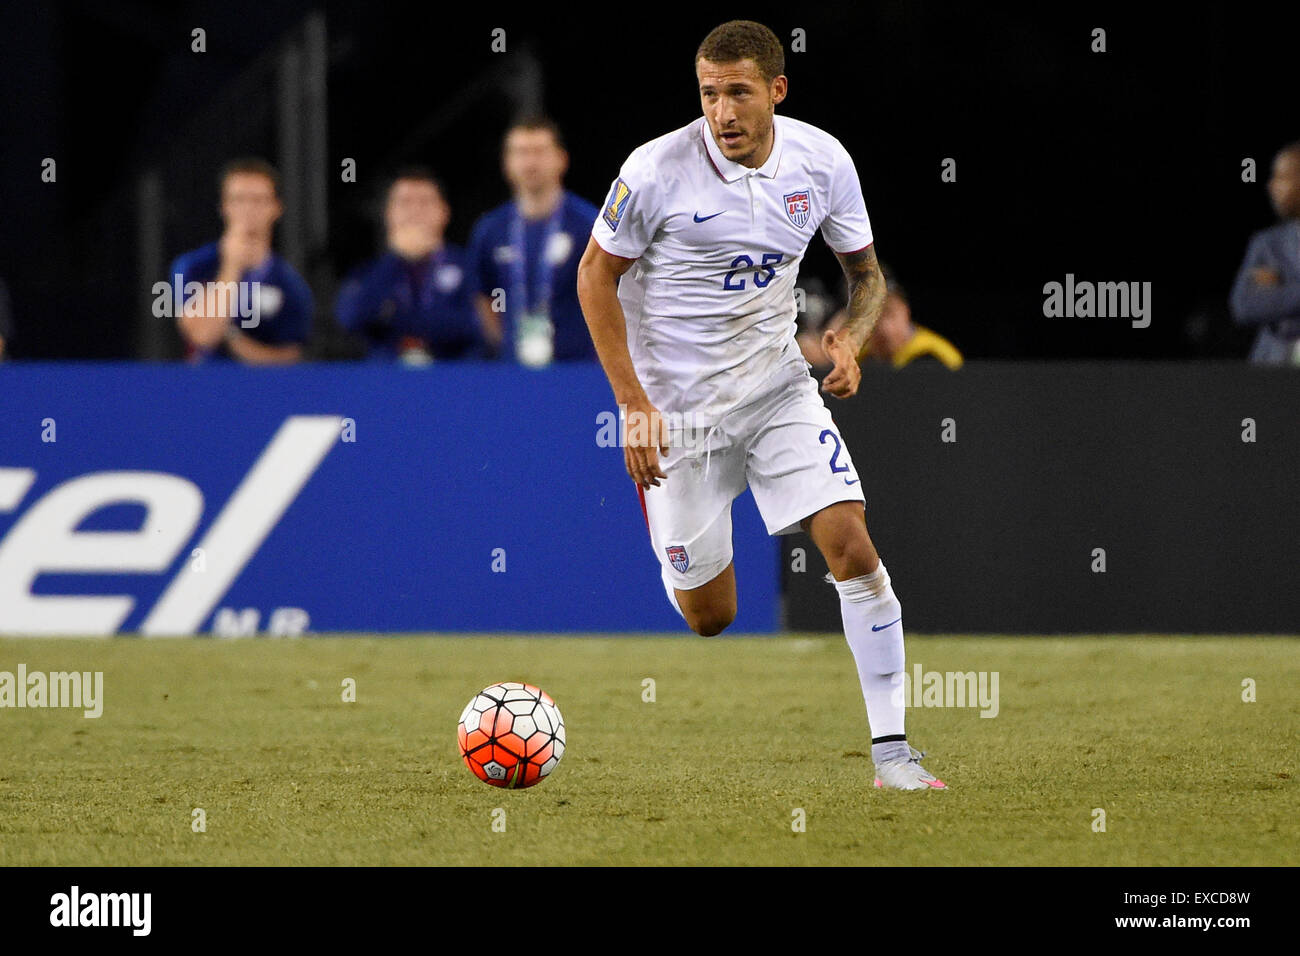 Foxborough, Massachusetts, USA. 10th July, 2015. United States defender Fabian Johnson (23) in game action during the CONCACAF Gold Cup group stage match between USA and Haiti held at Gillette Stadium, in Foxborough Massachusetts. USA defeated Haiti 1-0. Eric Canha/CSM/Alamy Live News Stock Photo